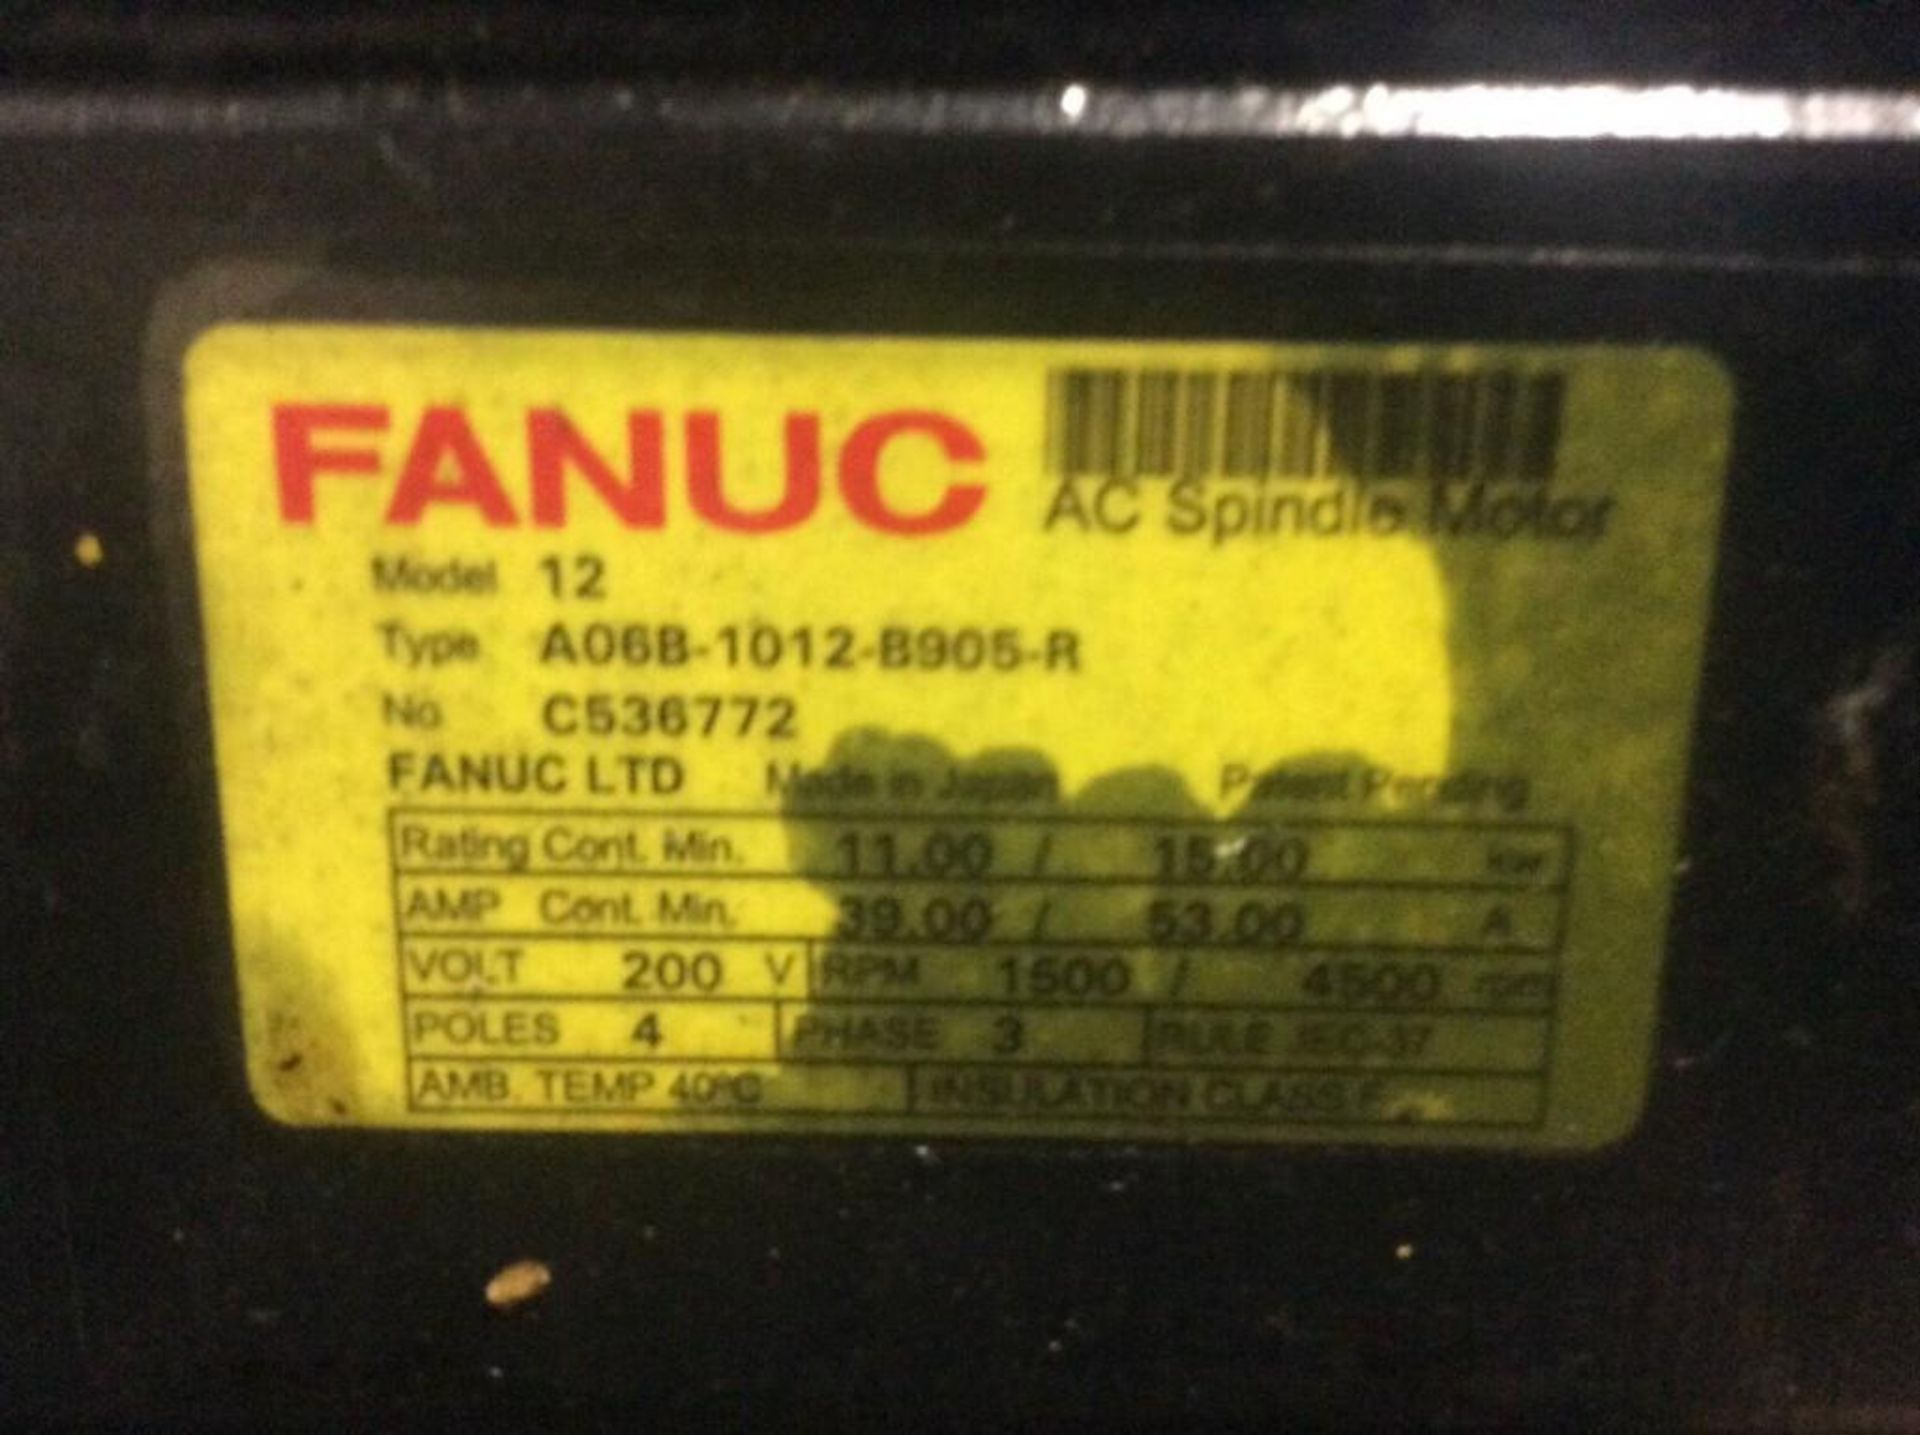 Fanuc #A06B-1012-B905-R Spindle Motor - Image 6 of 6